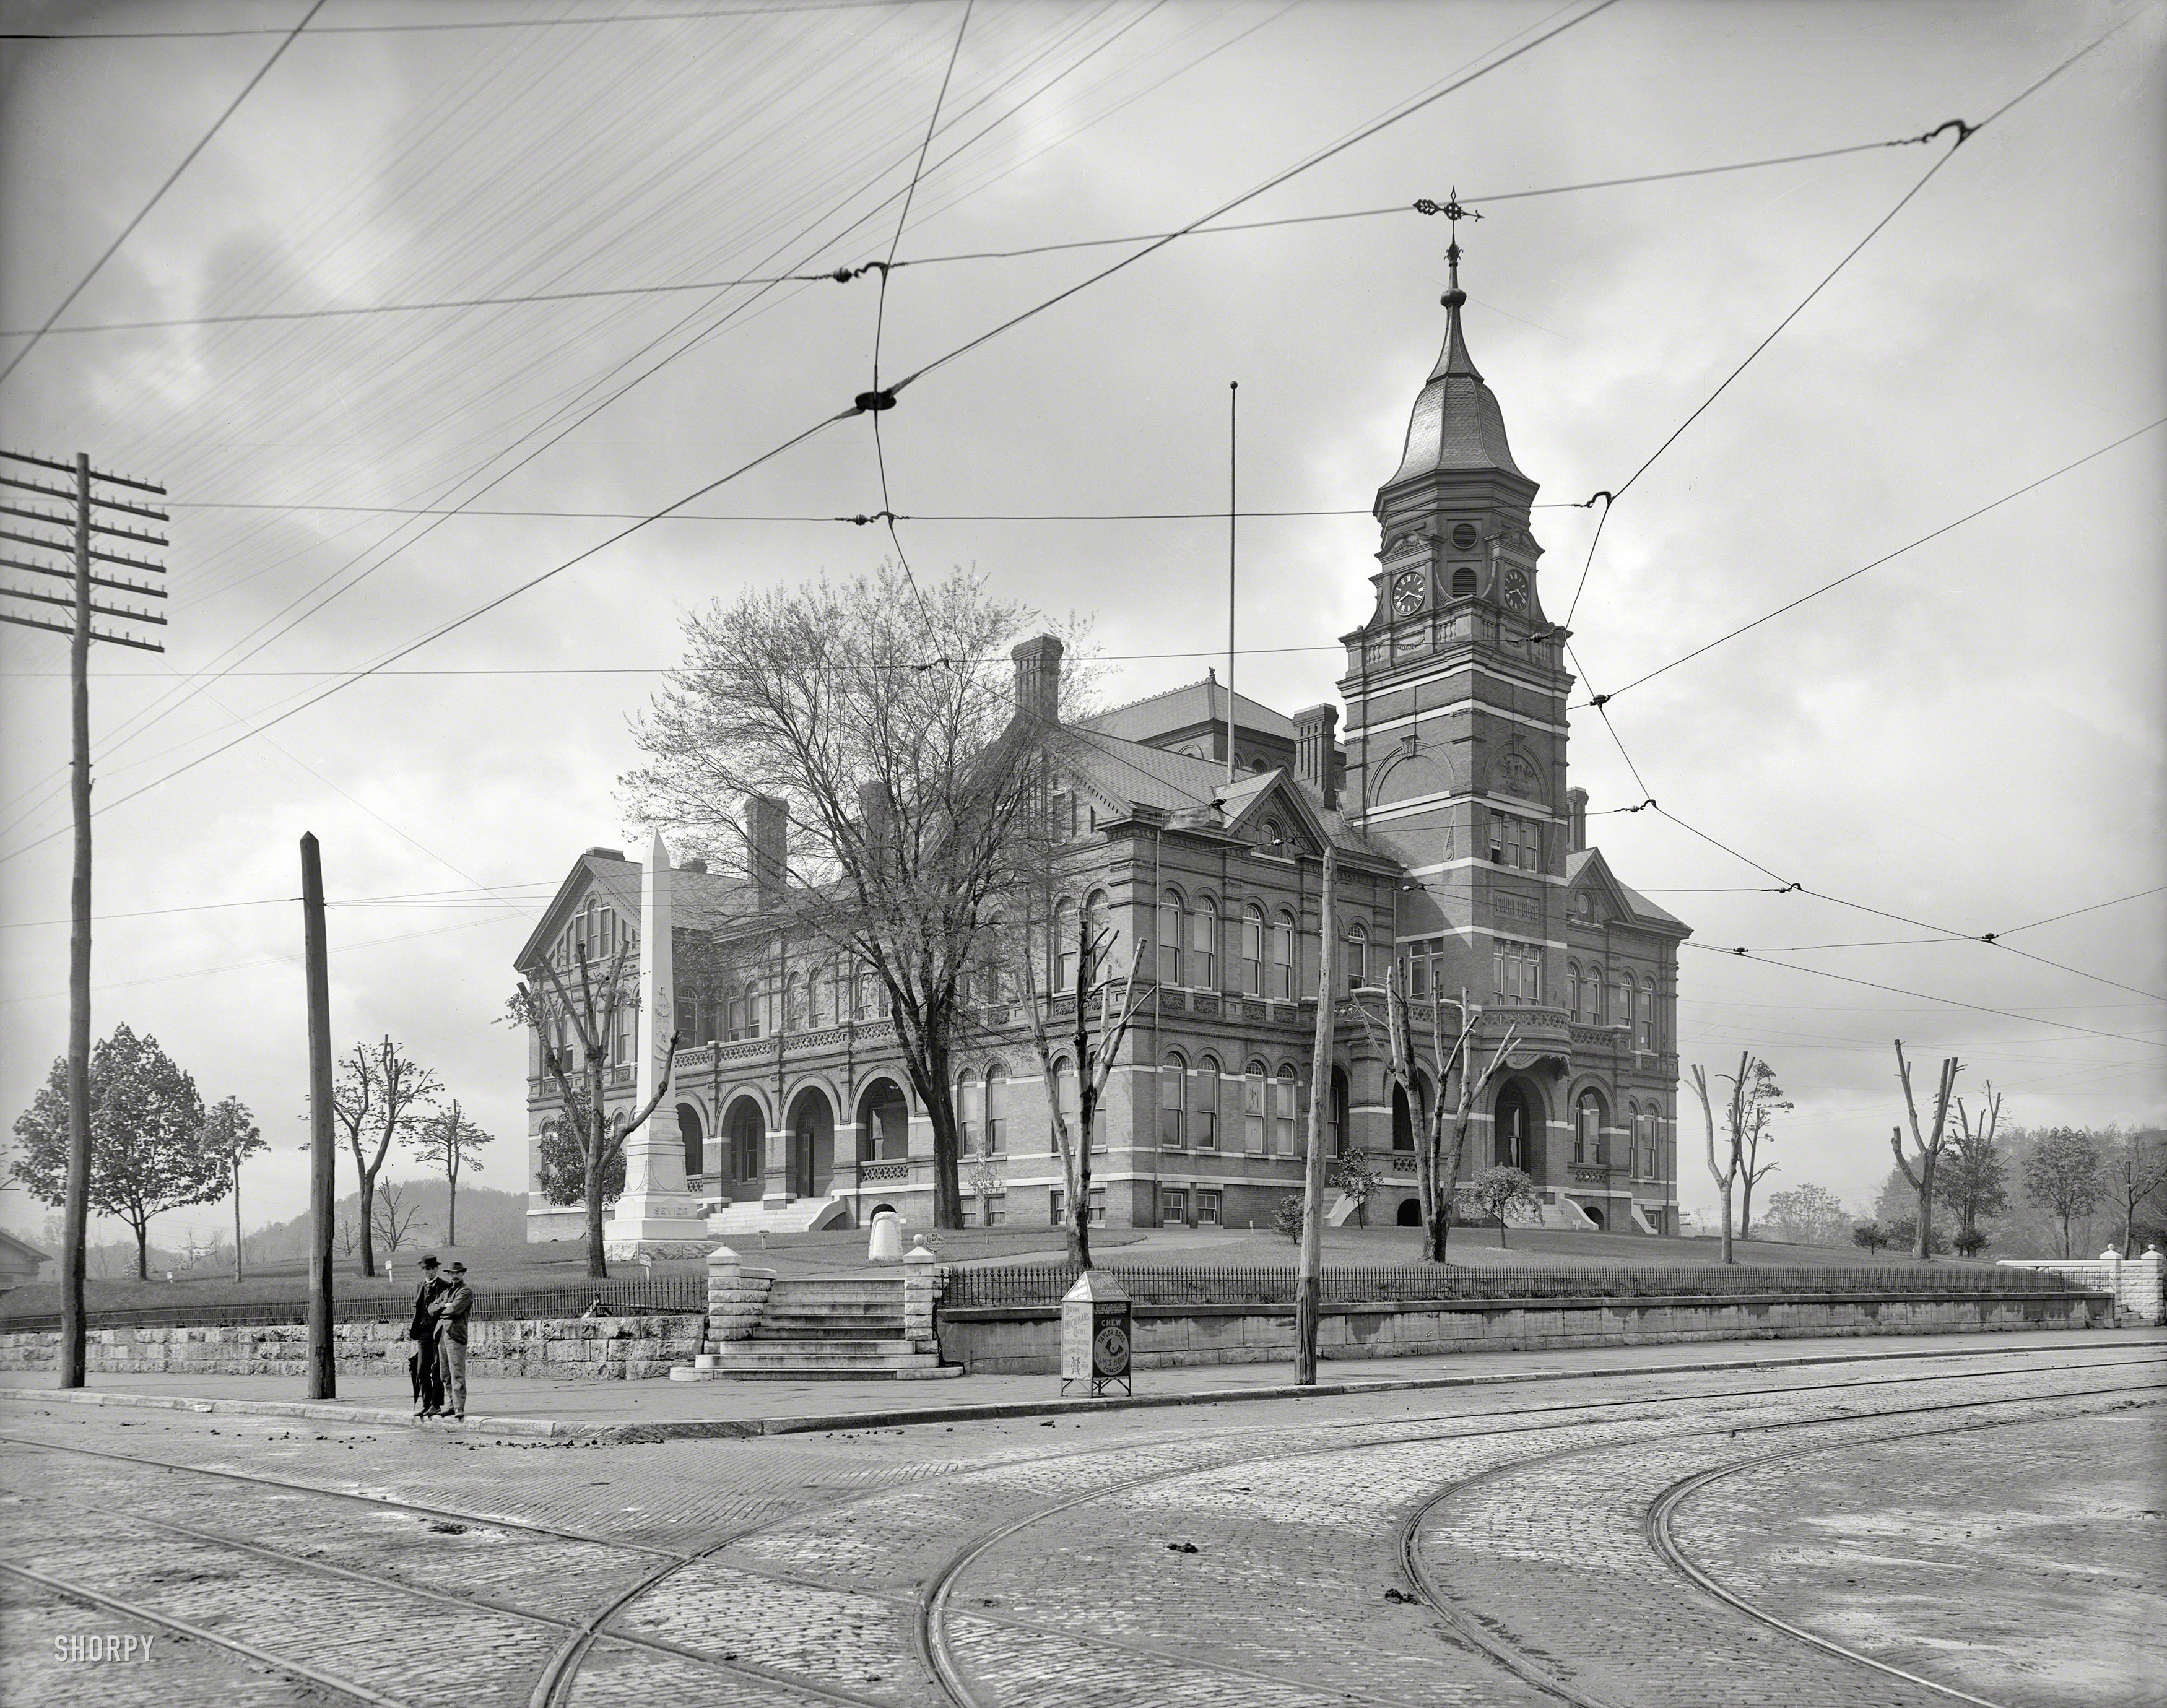 The Knoxville, Tennessee, courthouse circa 1903. With signage advising "Keep Off the Grass," "No Loafing," "Drink Hickman's Coffee" and "Chew Ram's Horn Tobacco." 8x10 glass negative, Detroit Publishing Company. View full size.